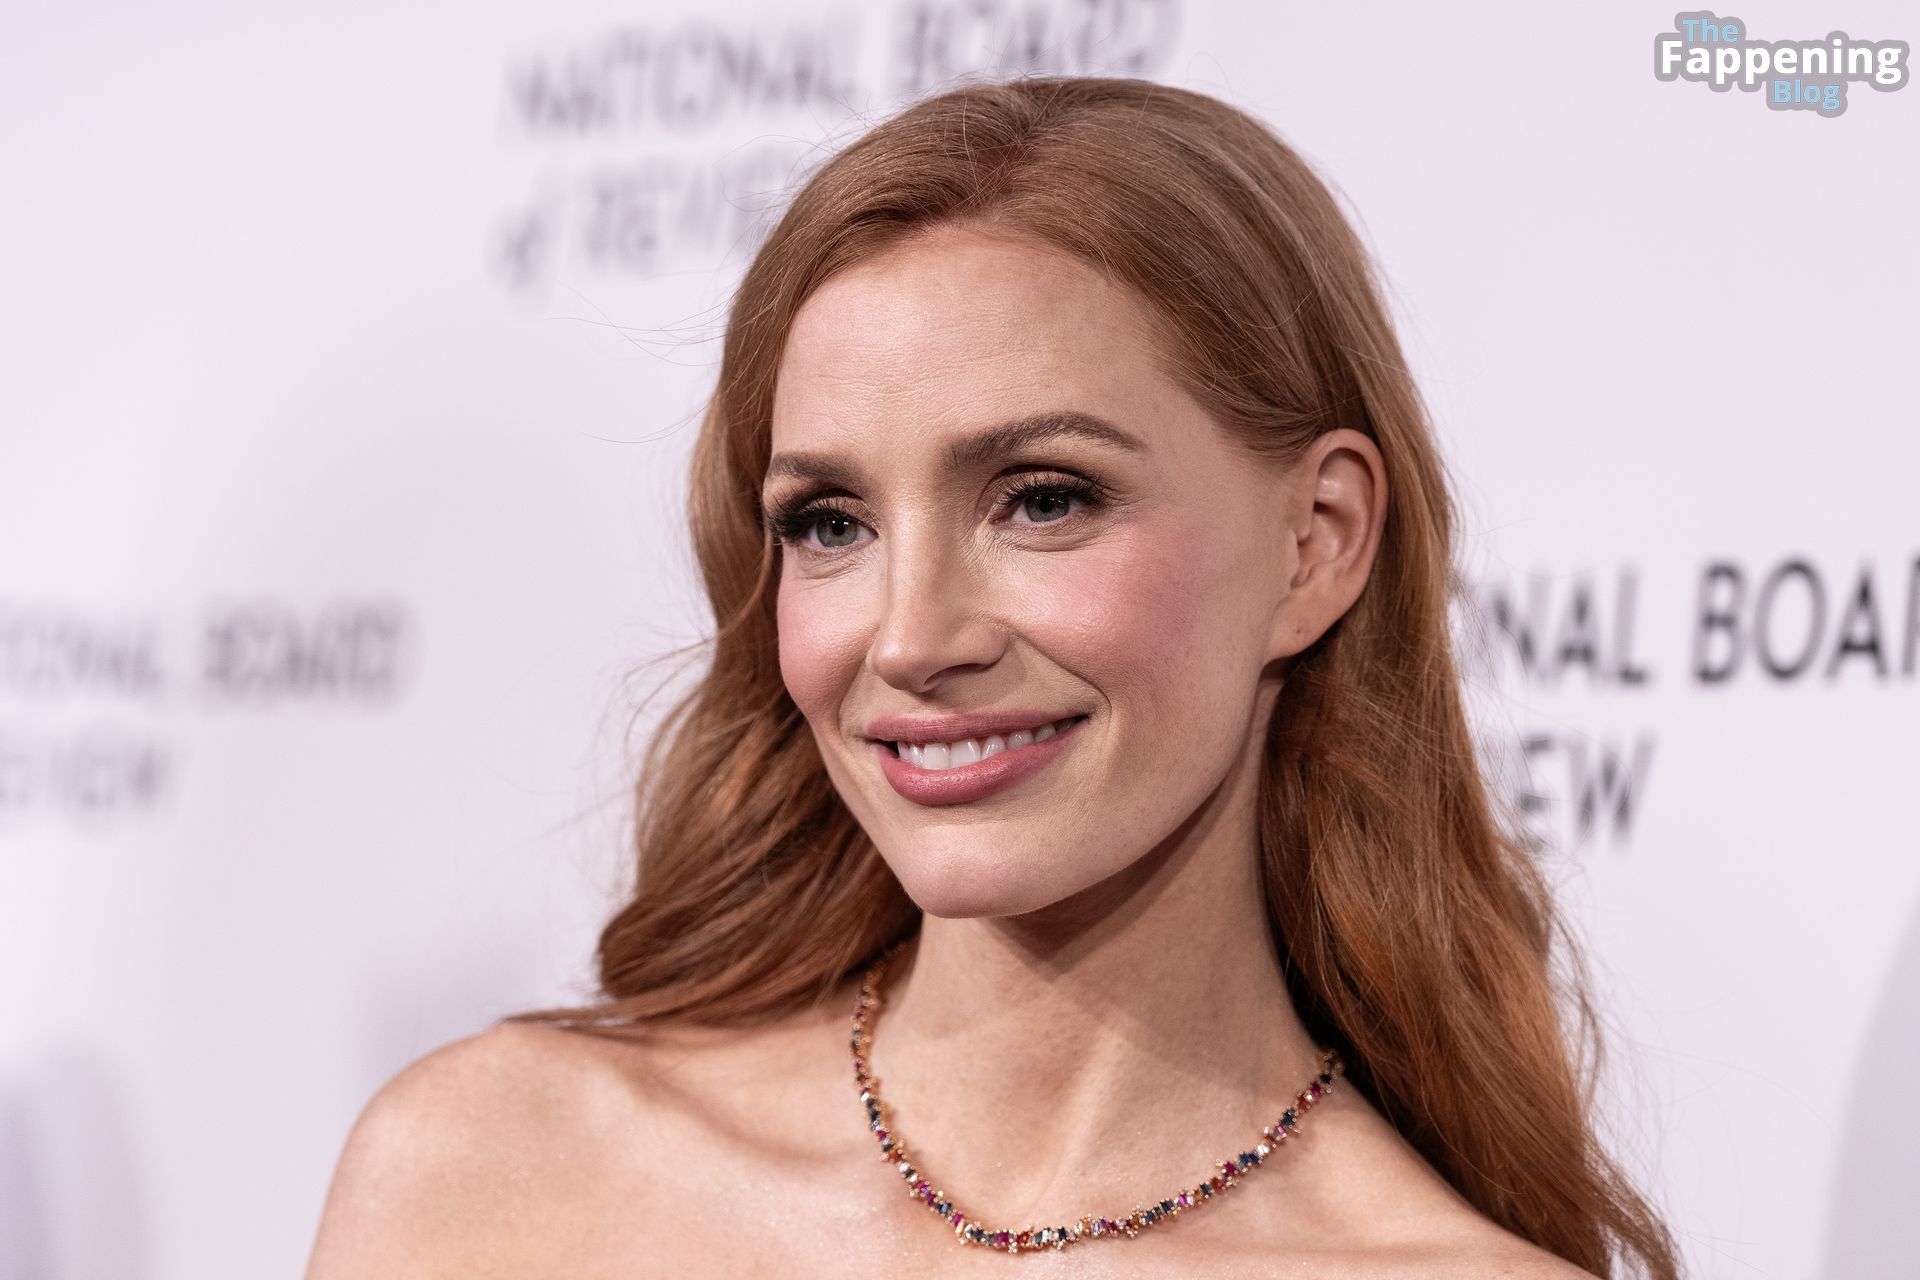 Jessica-Chastain-Sexy-51-The-Fappening-Blog.jpg